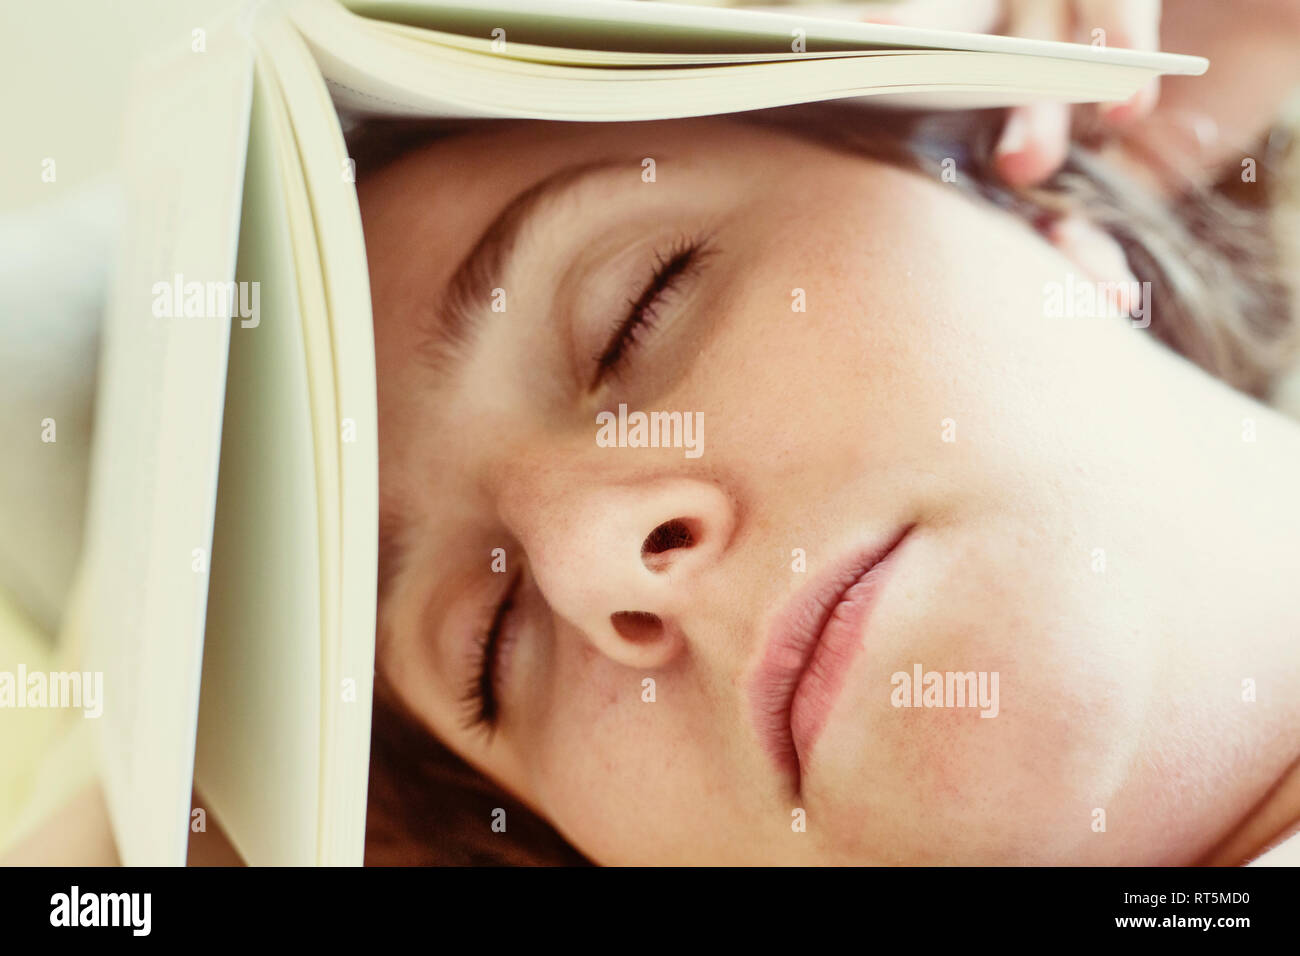 Portrait of young woman sleeping with book on head, close-up Stock Photo